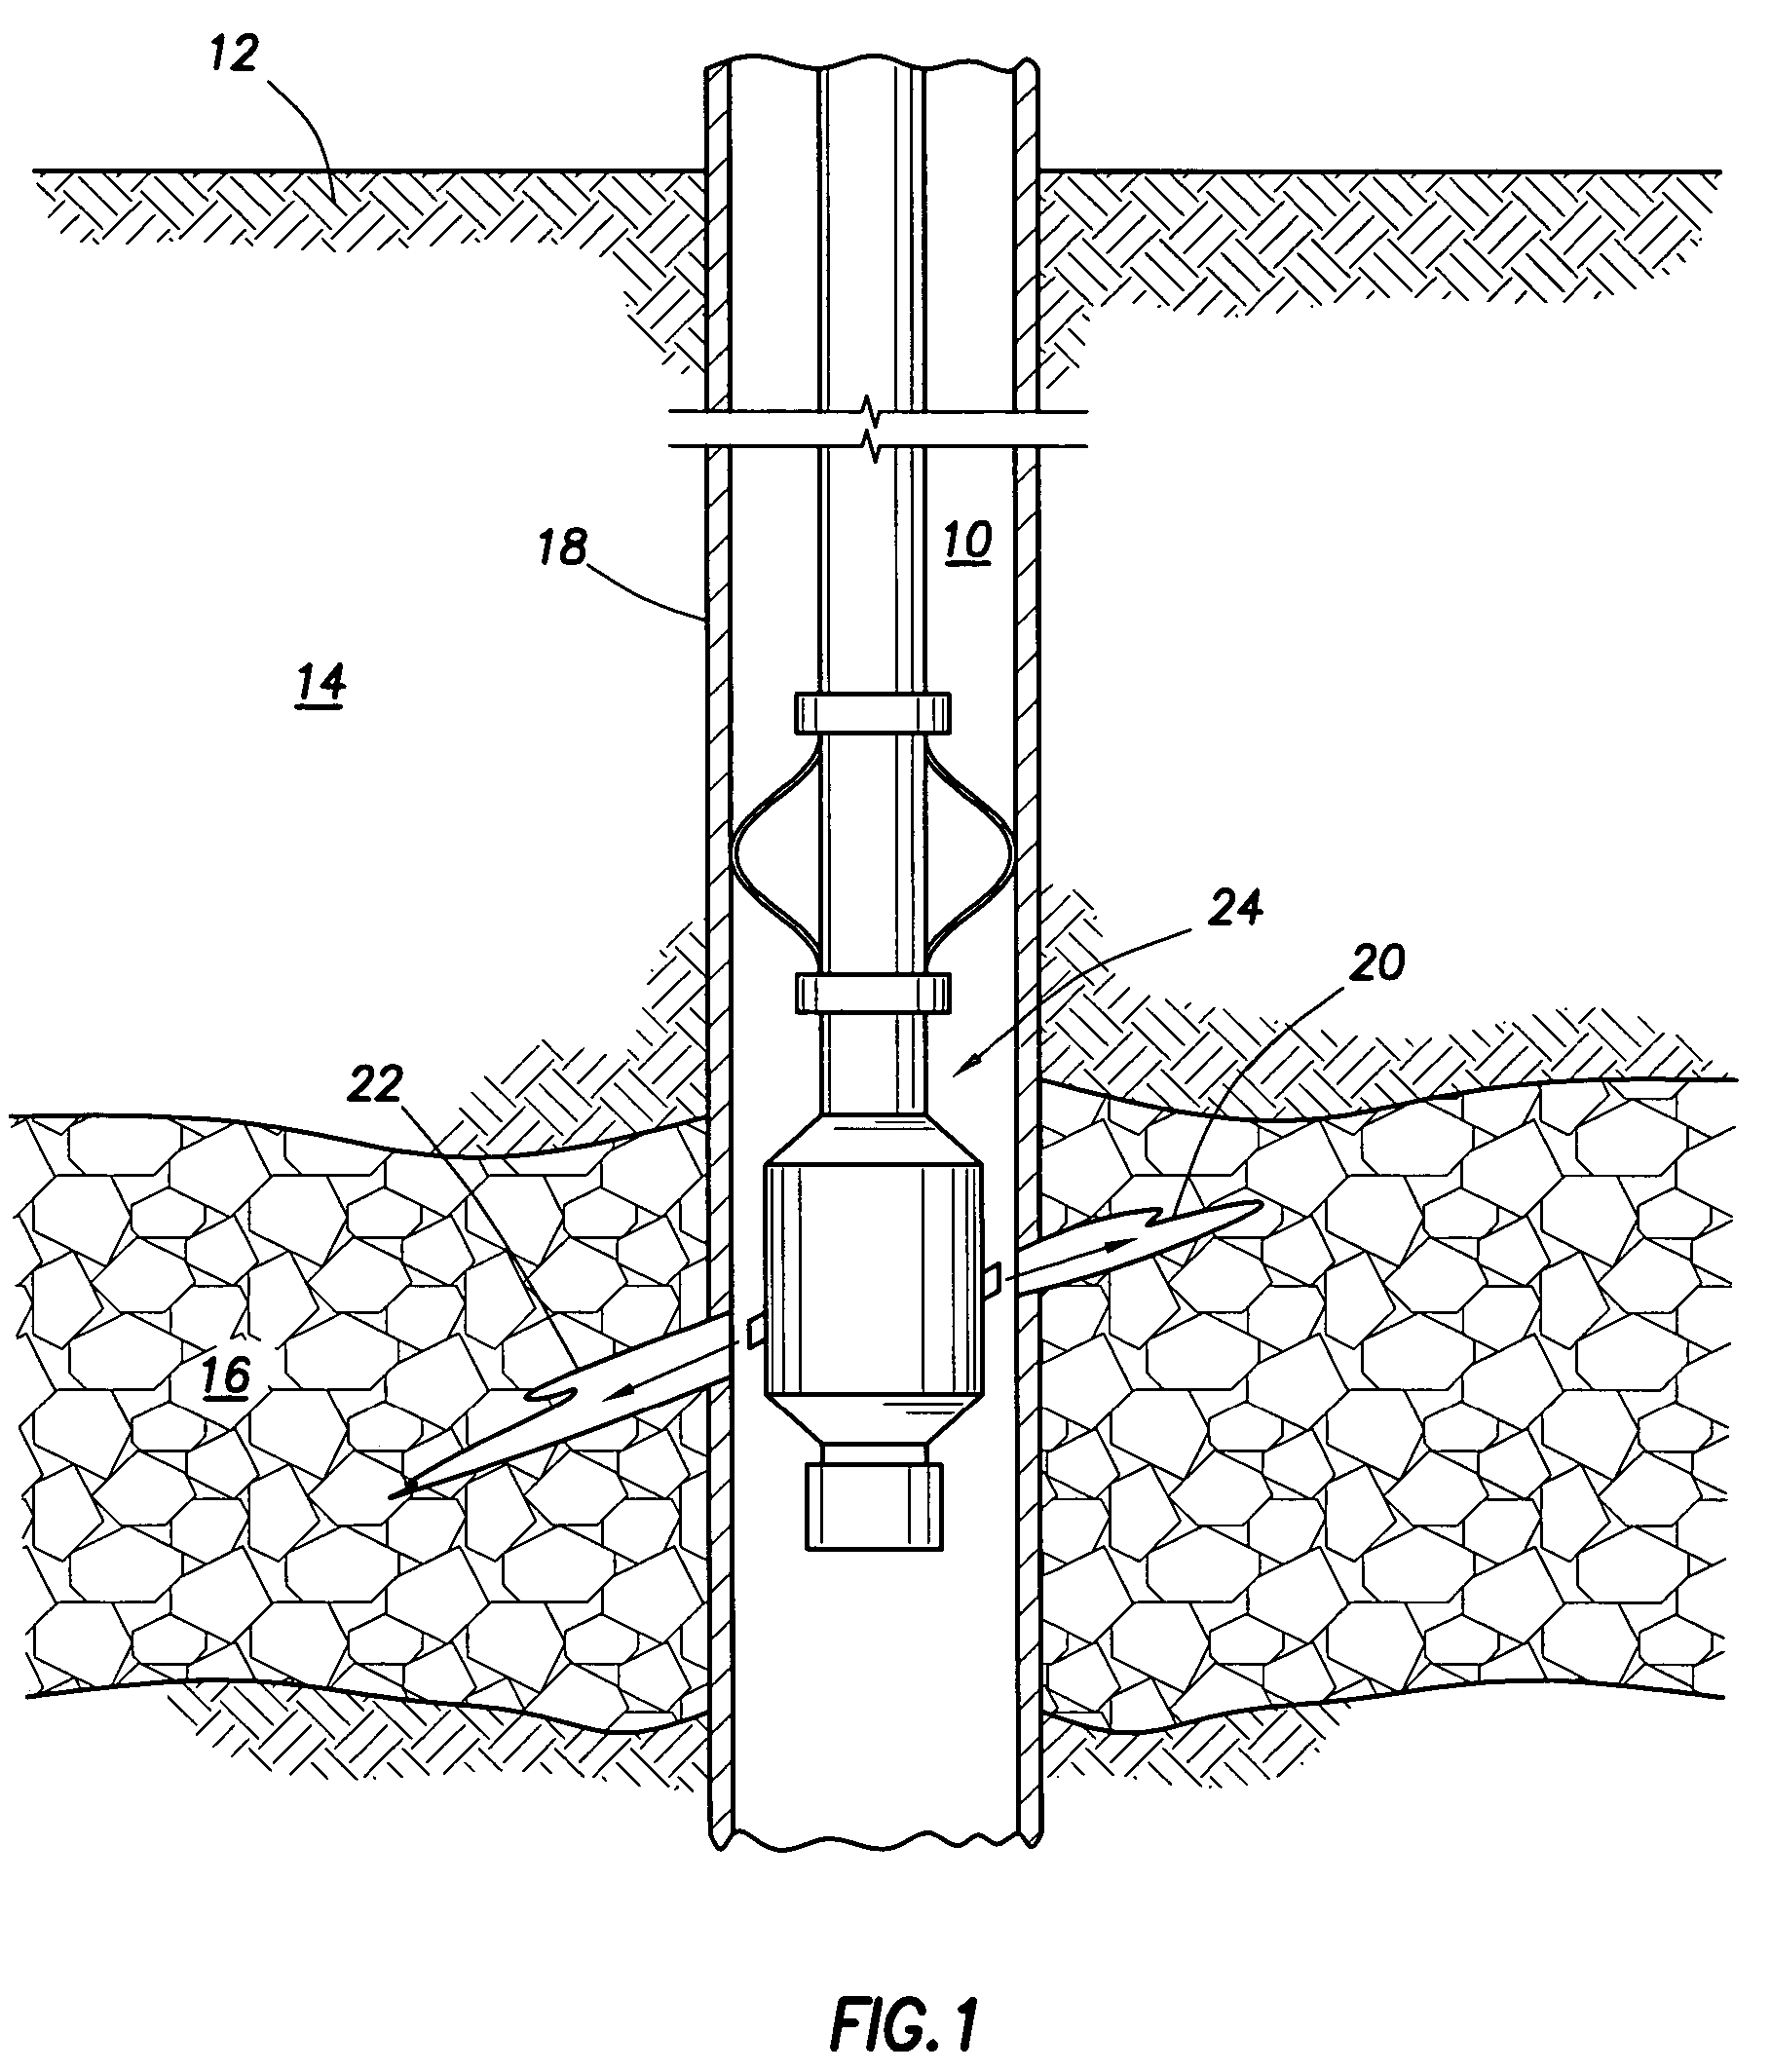 Method of optimizing production of gas from vertical wells in coal seams